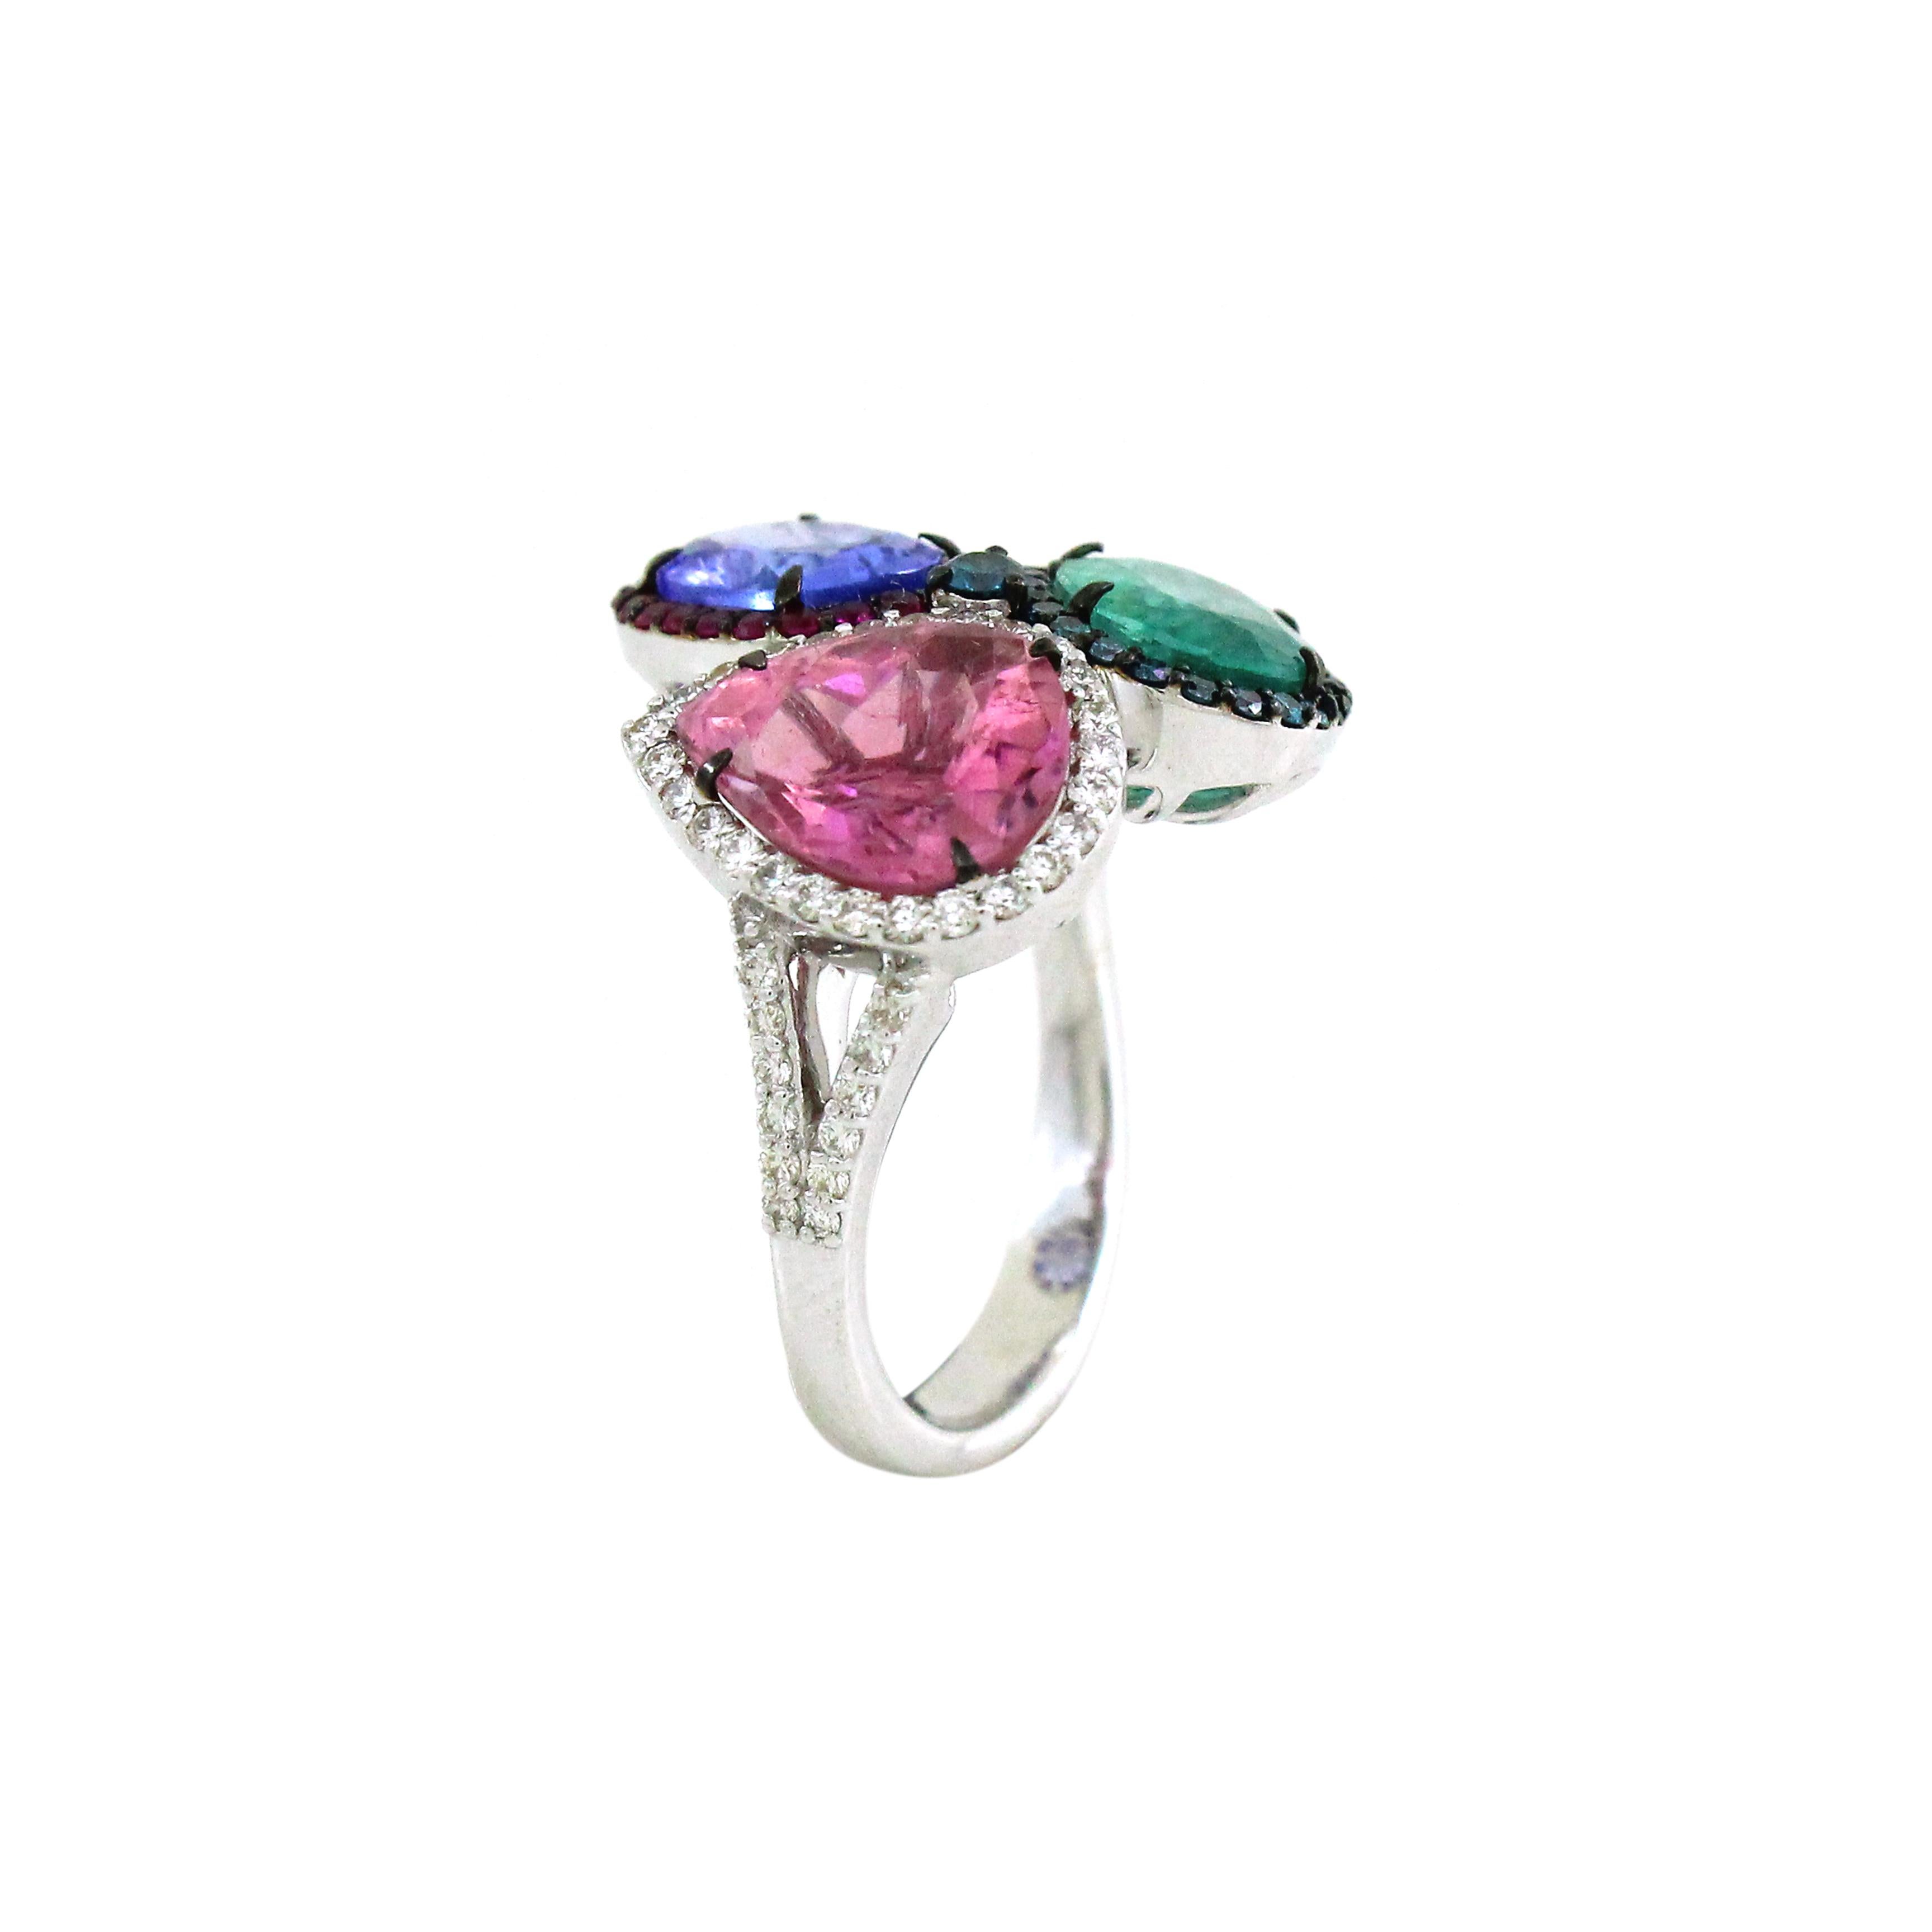 Elegance and extravagance intertwine in this mesmerizing three-stone ring. At its heart, a tantalizing 1.59-carat oval-cut tanzanite exudes a deep blue-violet hue, its brilliance amplified by a dazzling halo of 22 round rubies, each 0.19 carats.